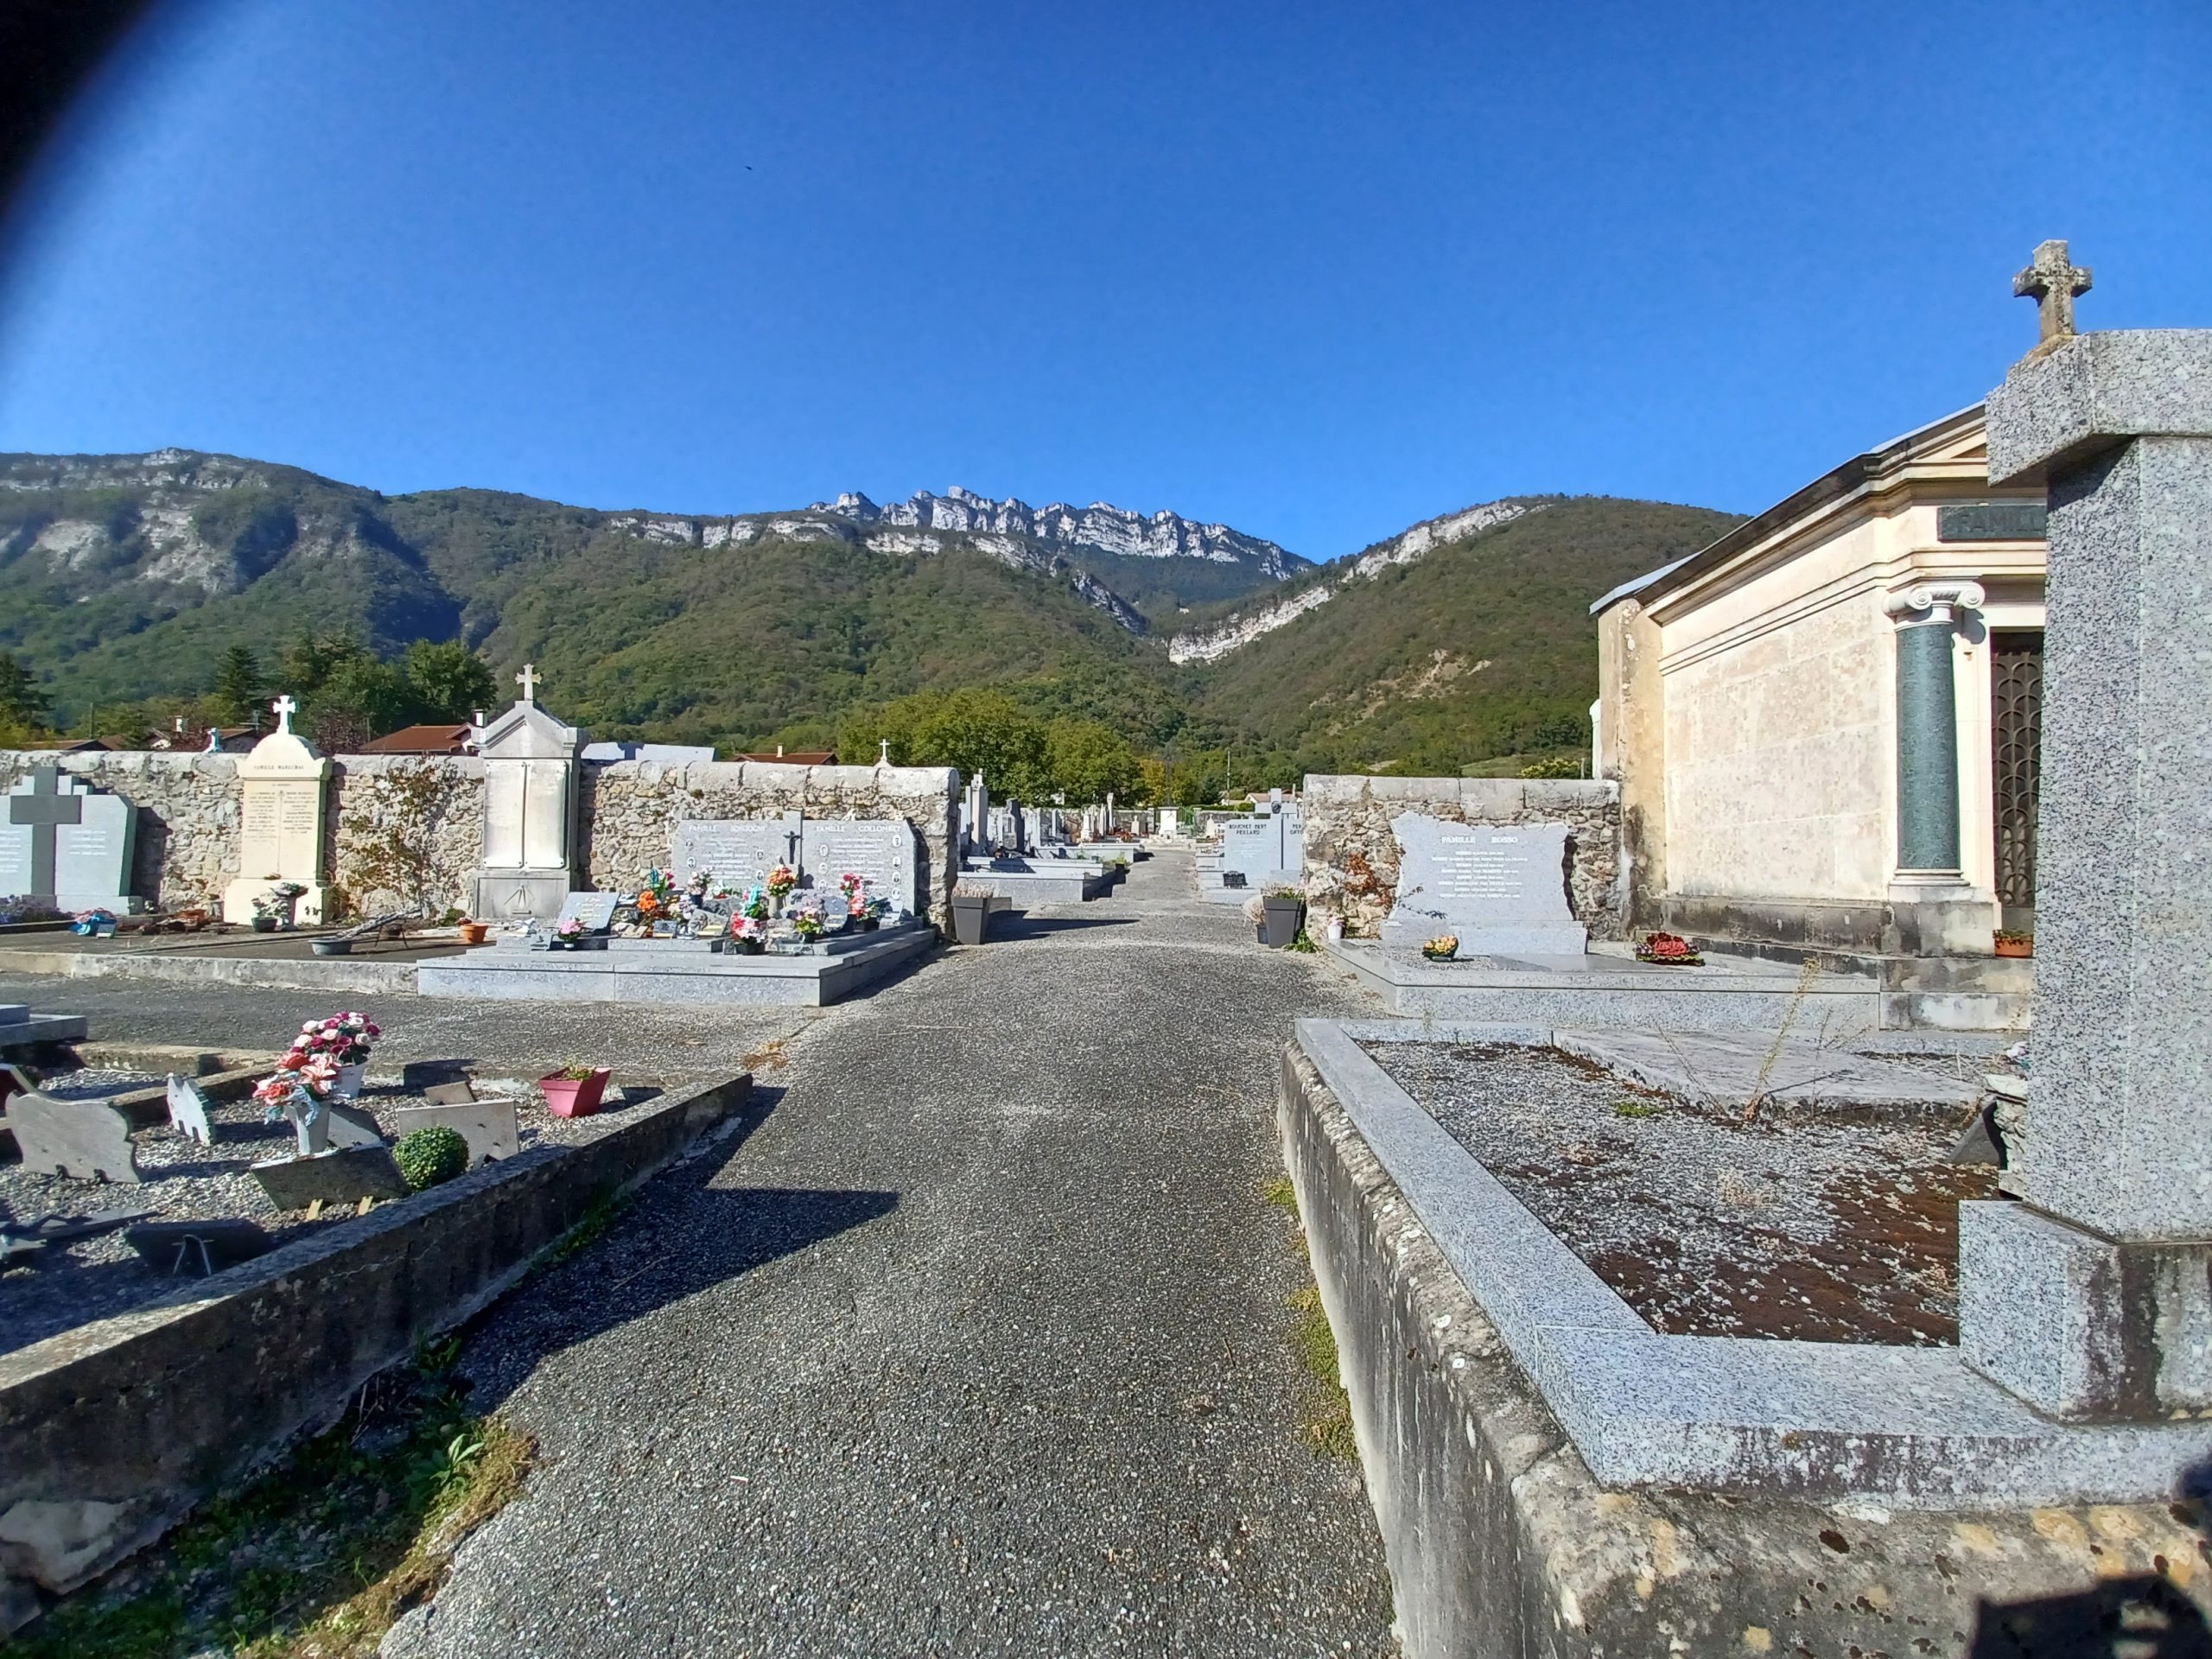 An alley at a French cemetary, with a view of the Alps